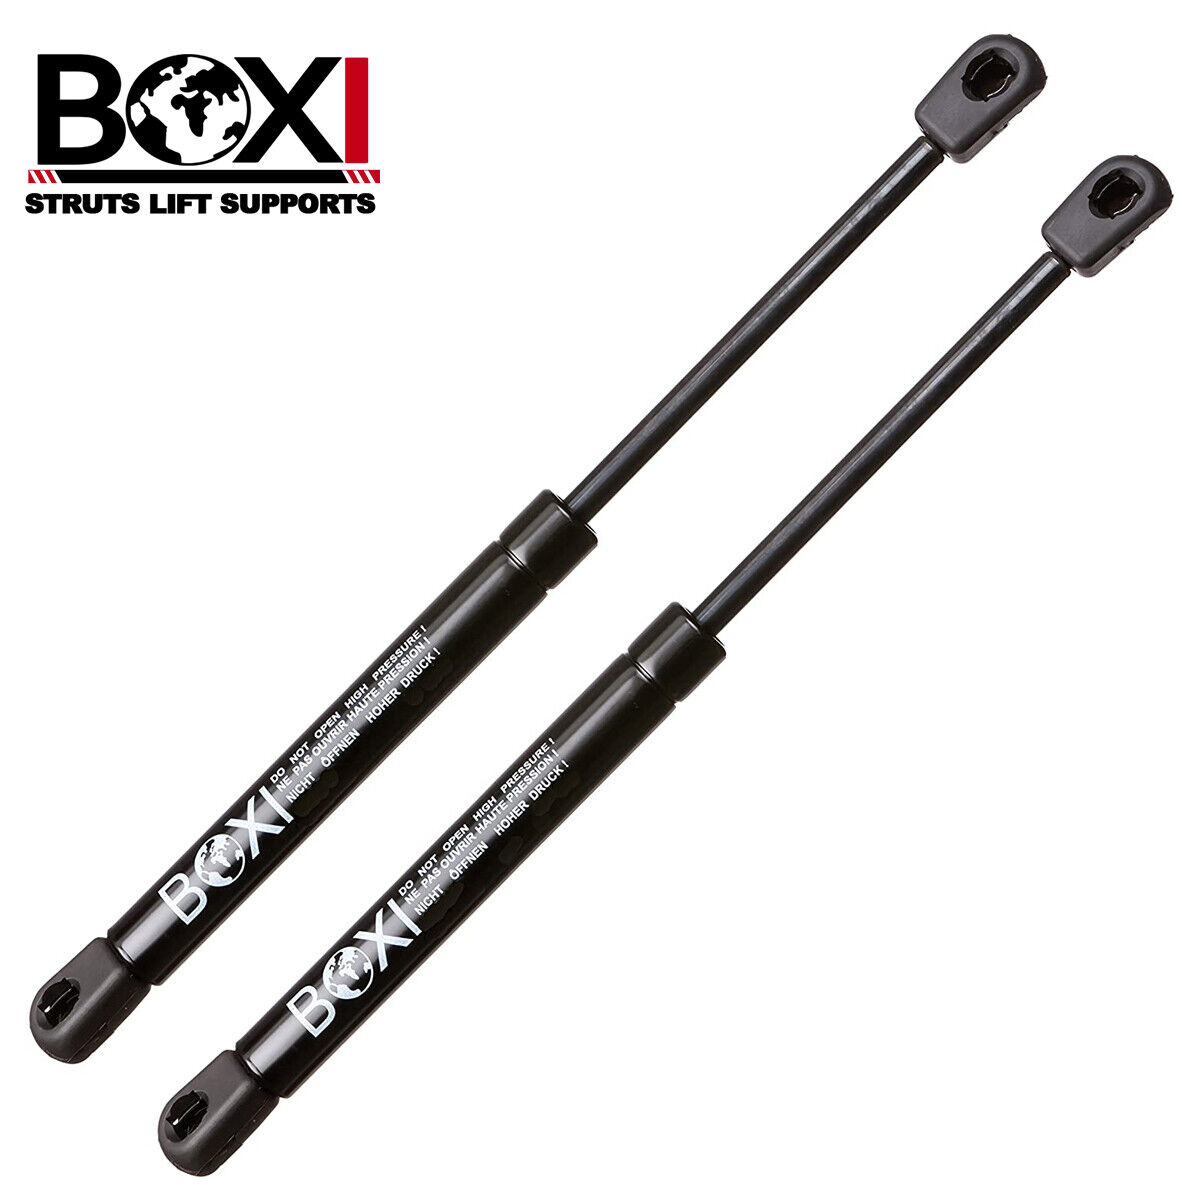 2X REAR TRUNK LID LIFT SUPPORTS SHOCKS STRUTS ARMS PROPS RODS  FOR CADILLAC CTS